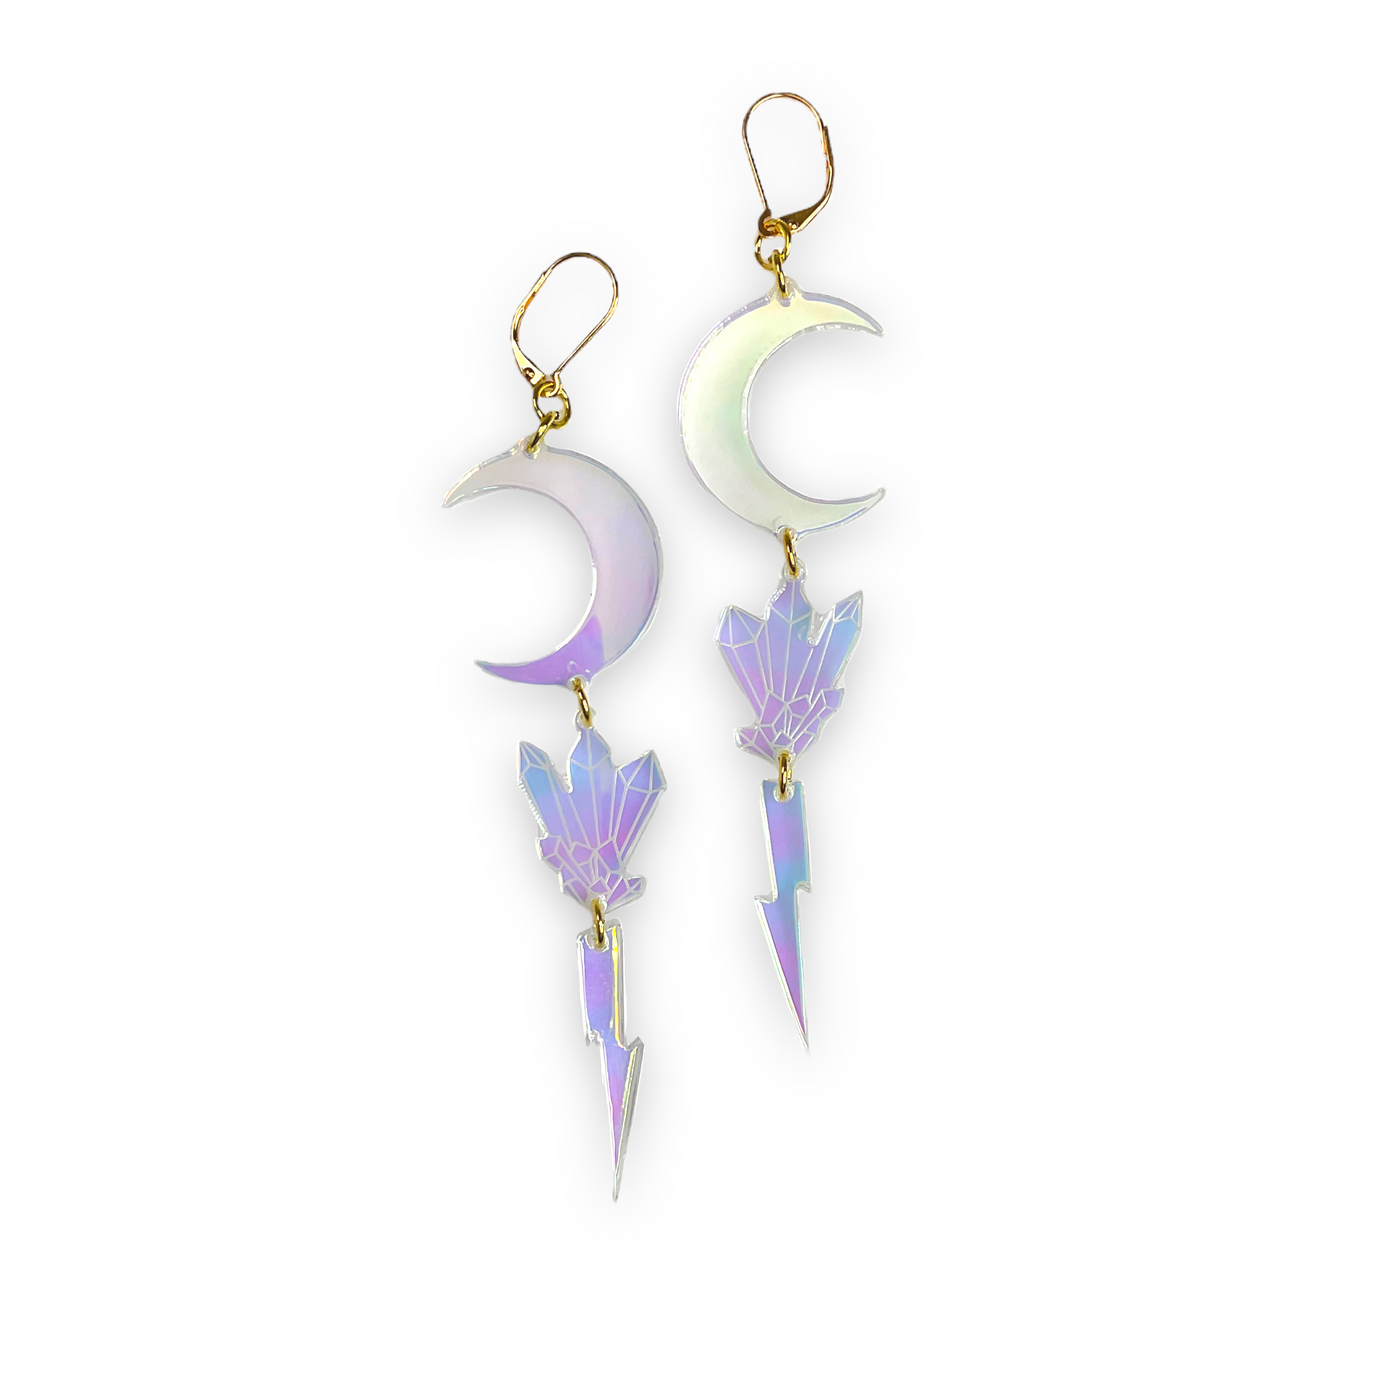 Waxing, Waning, and Witching Earrings